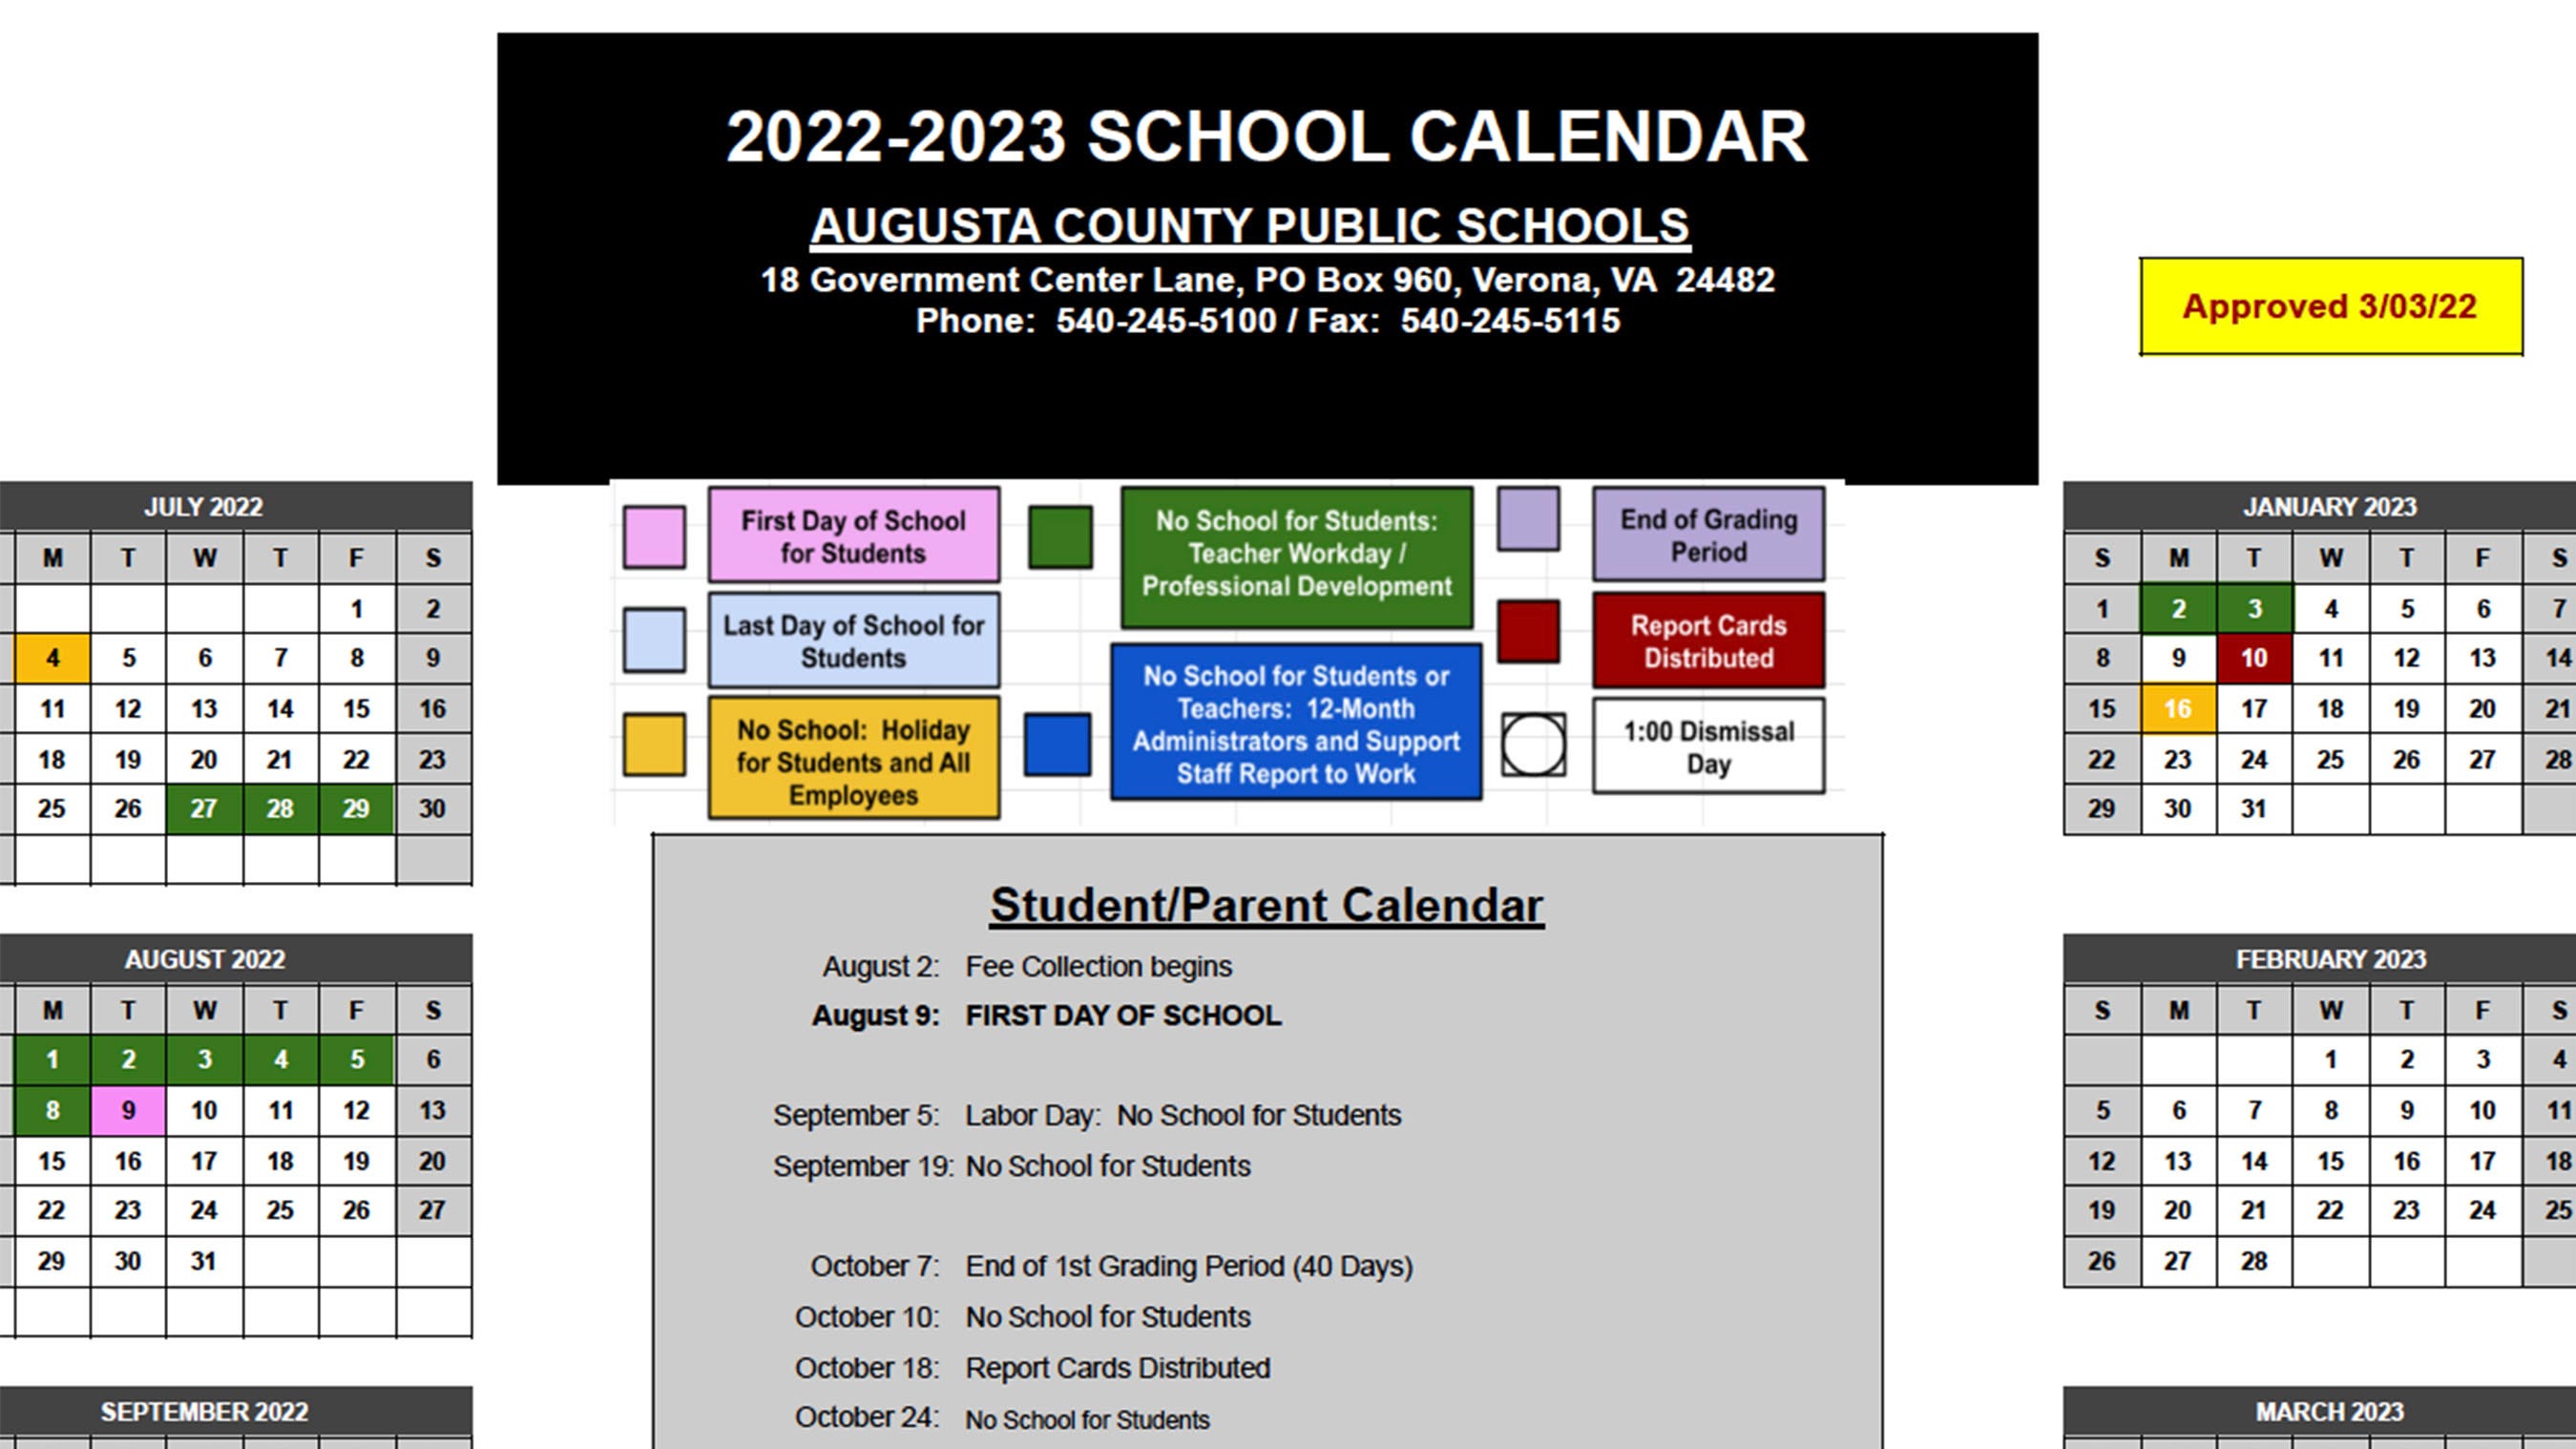 Augusta County approves school calendar for 20222023 academic year